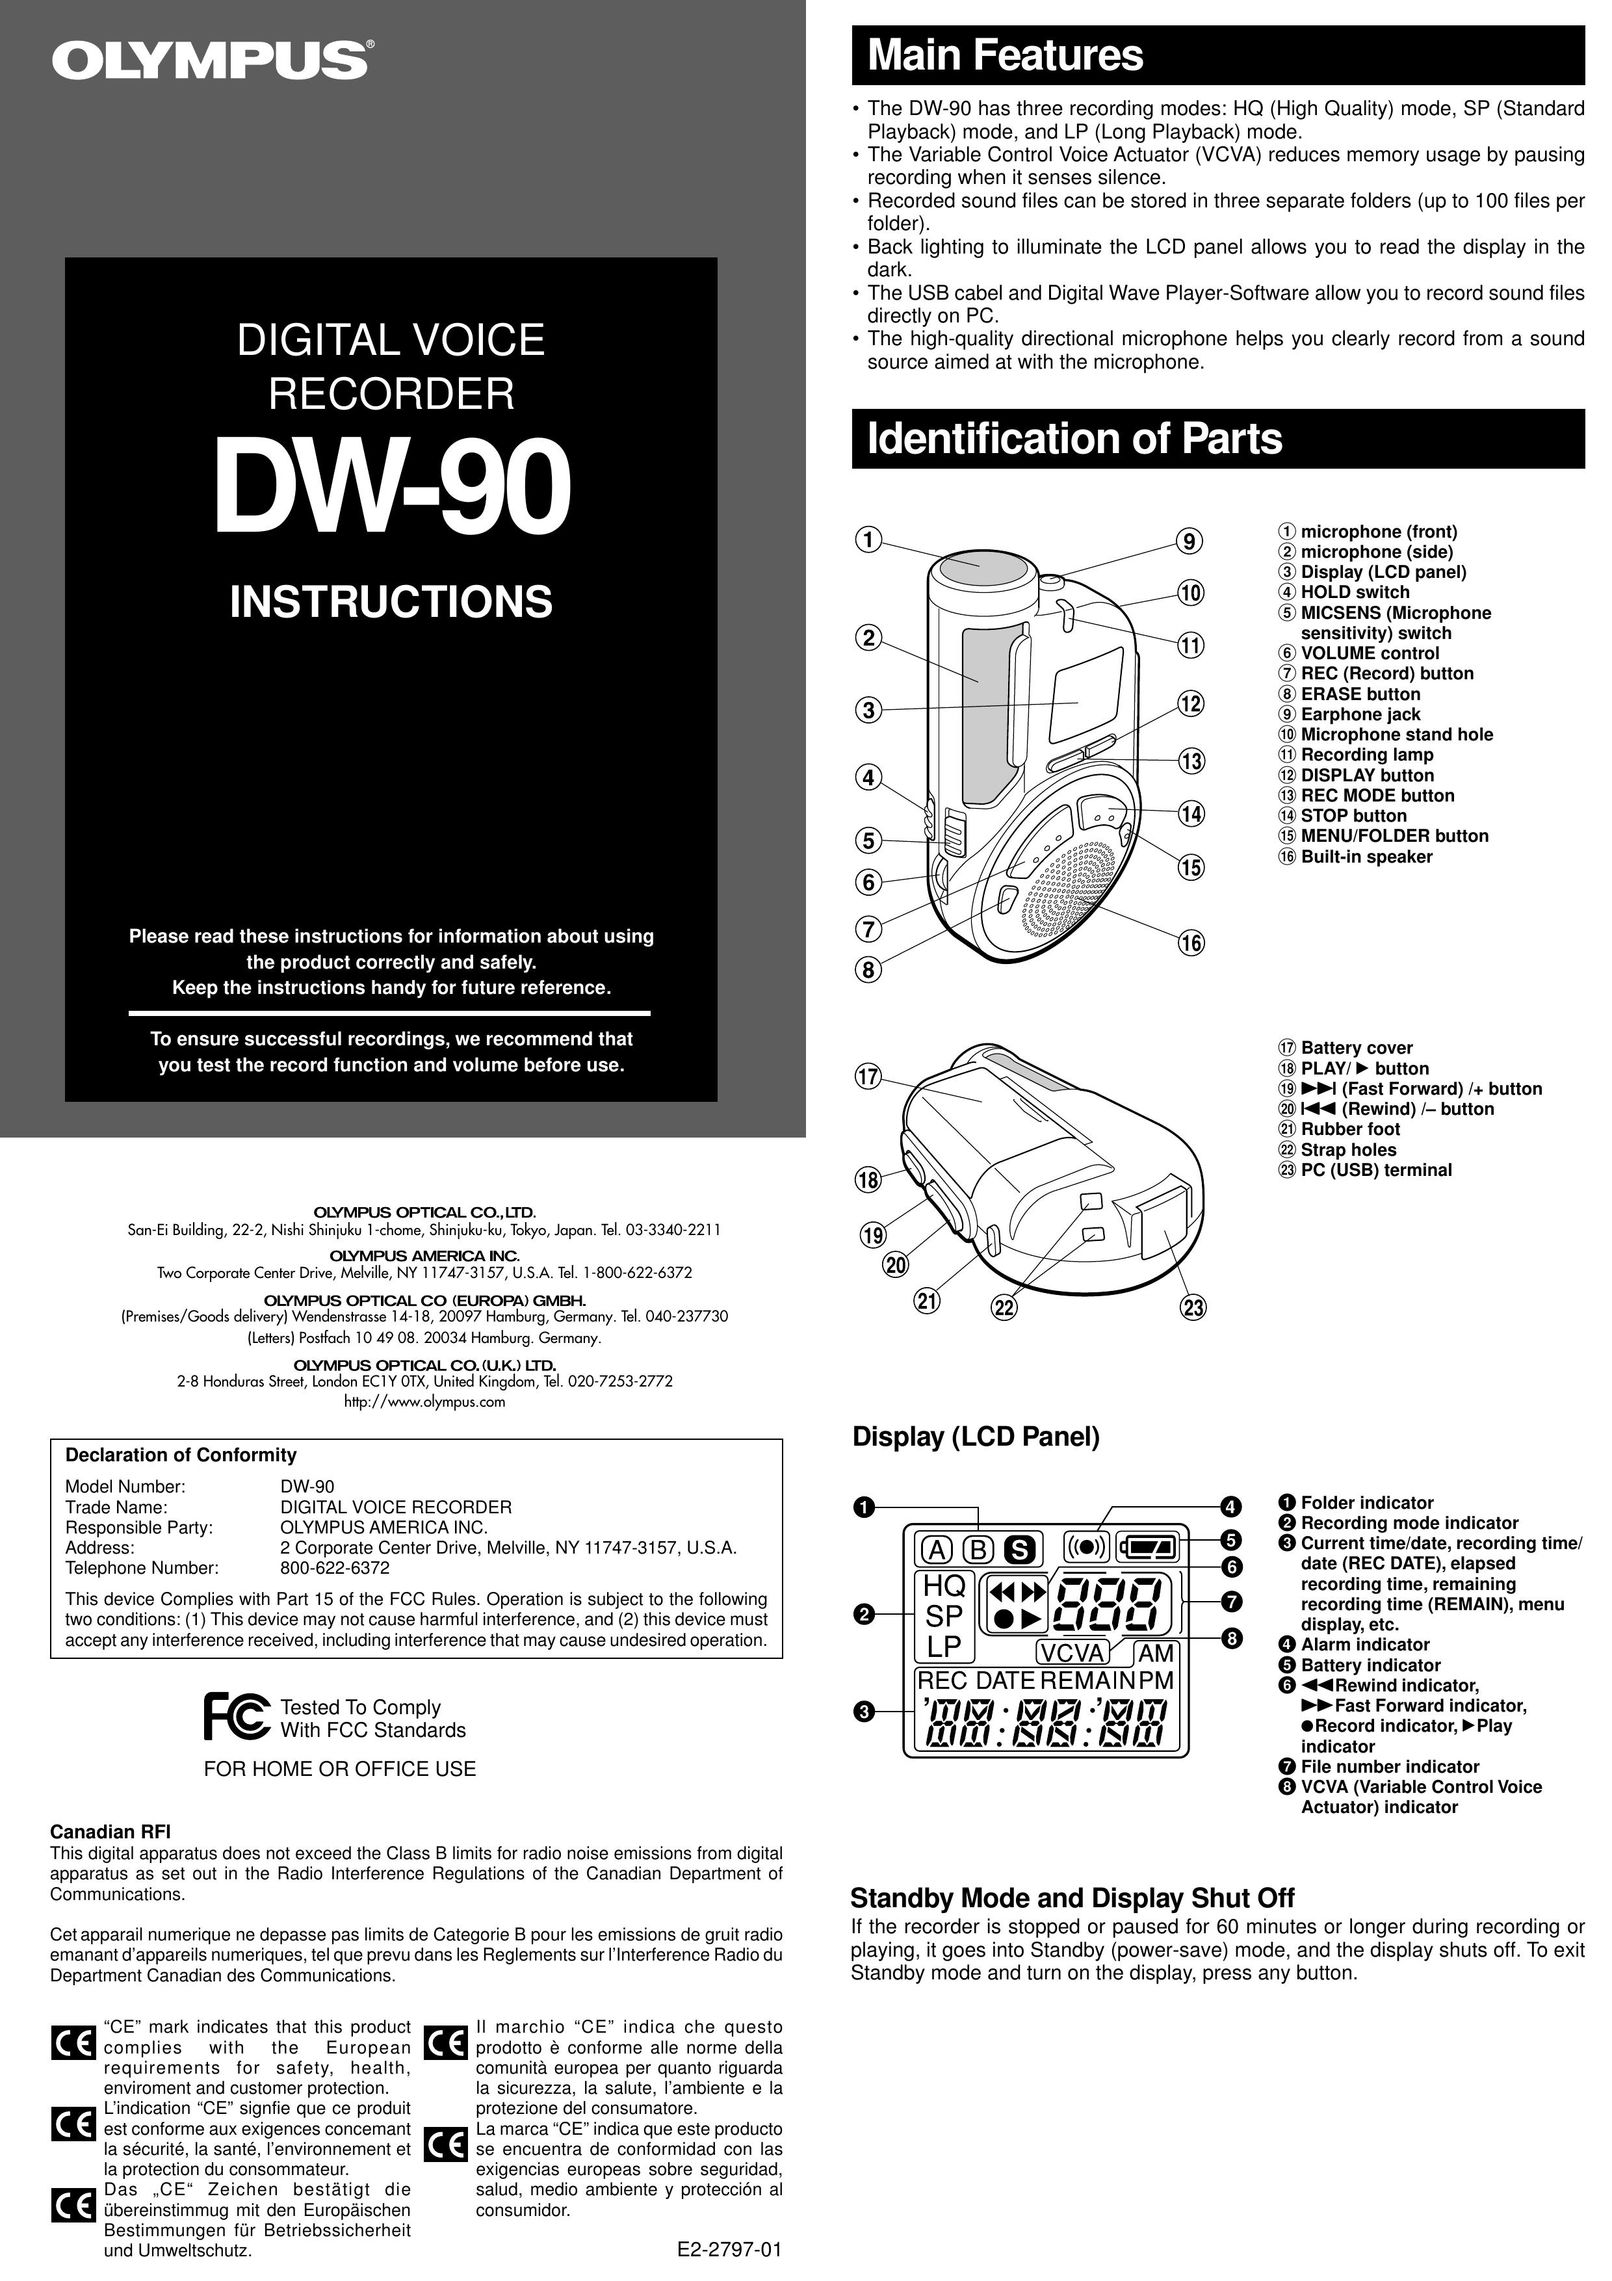 Olympus DW-90 Microcassette Recorder User Manual